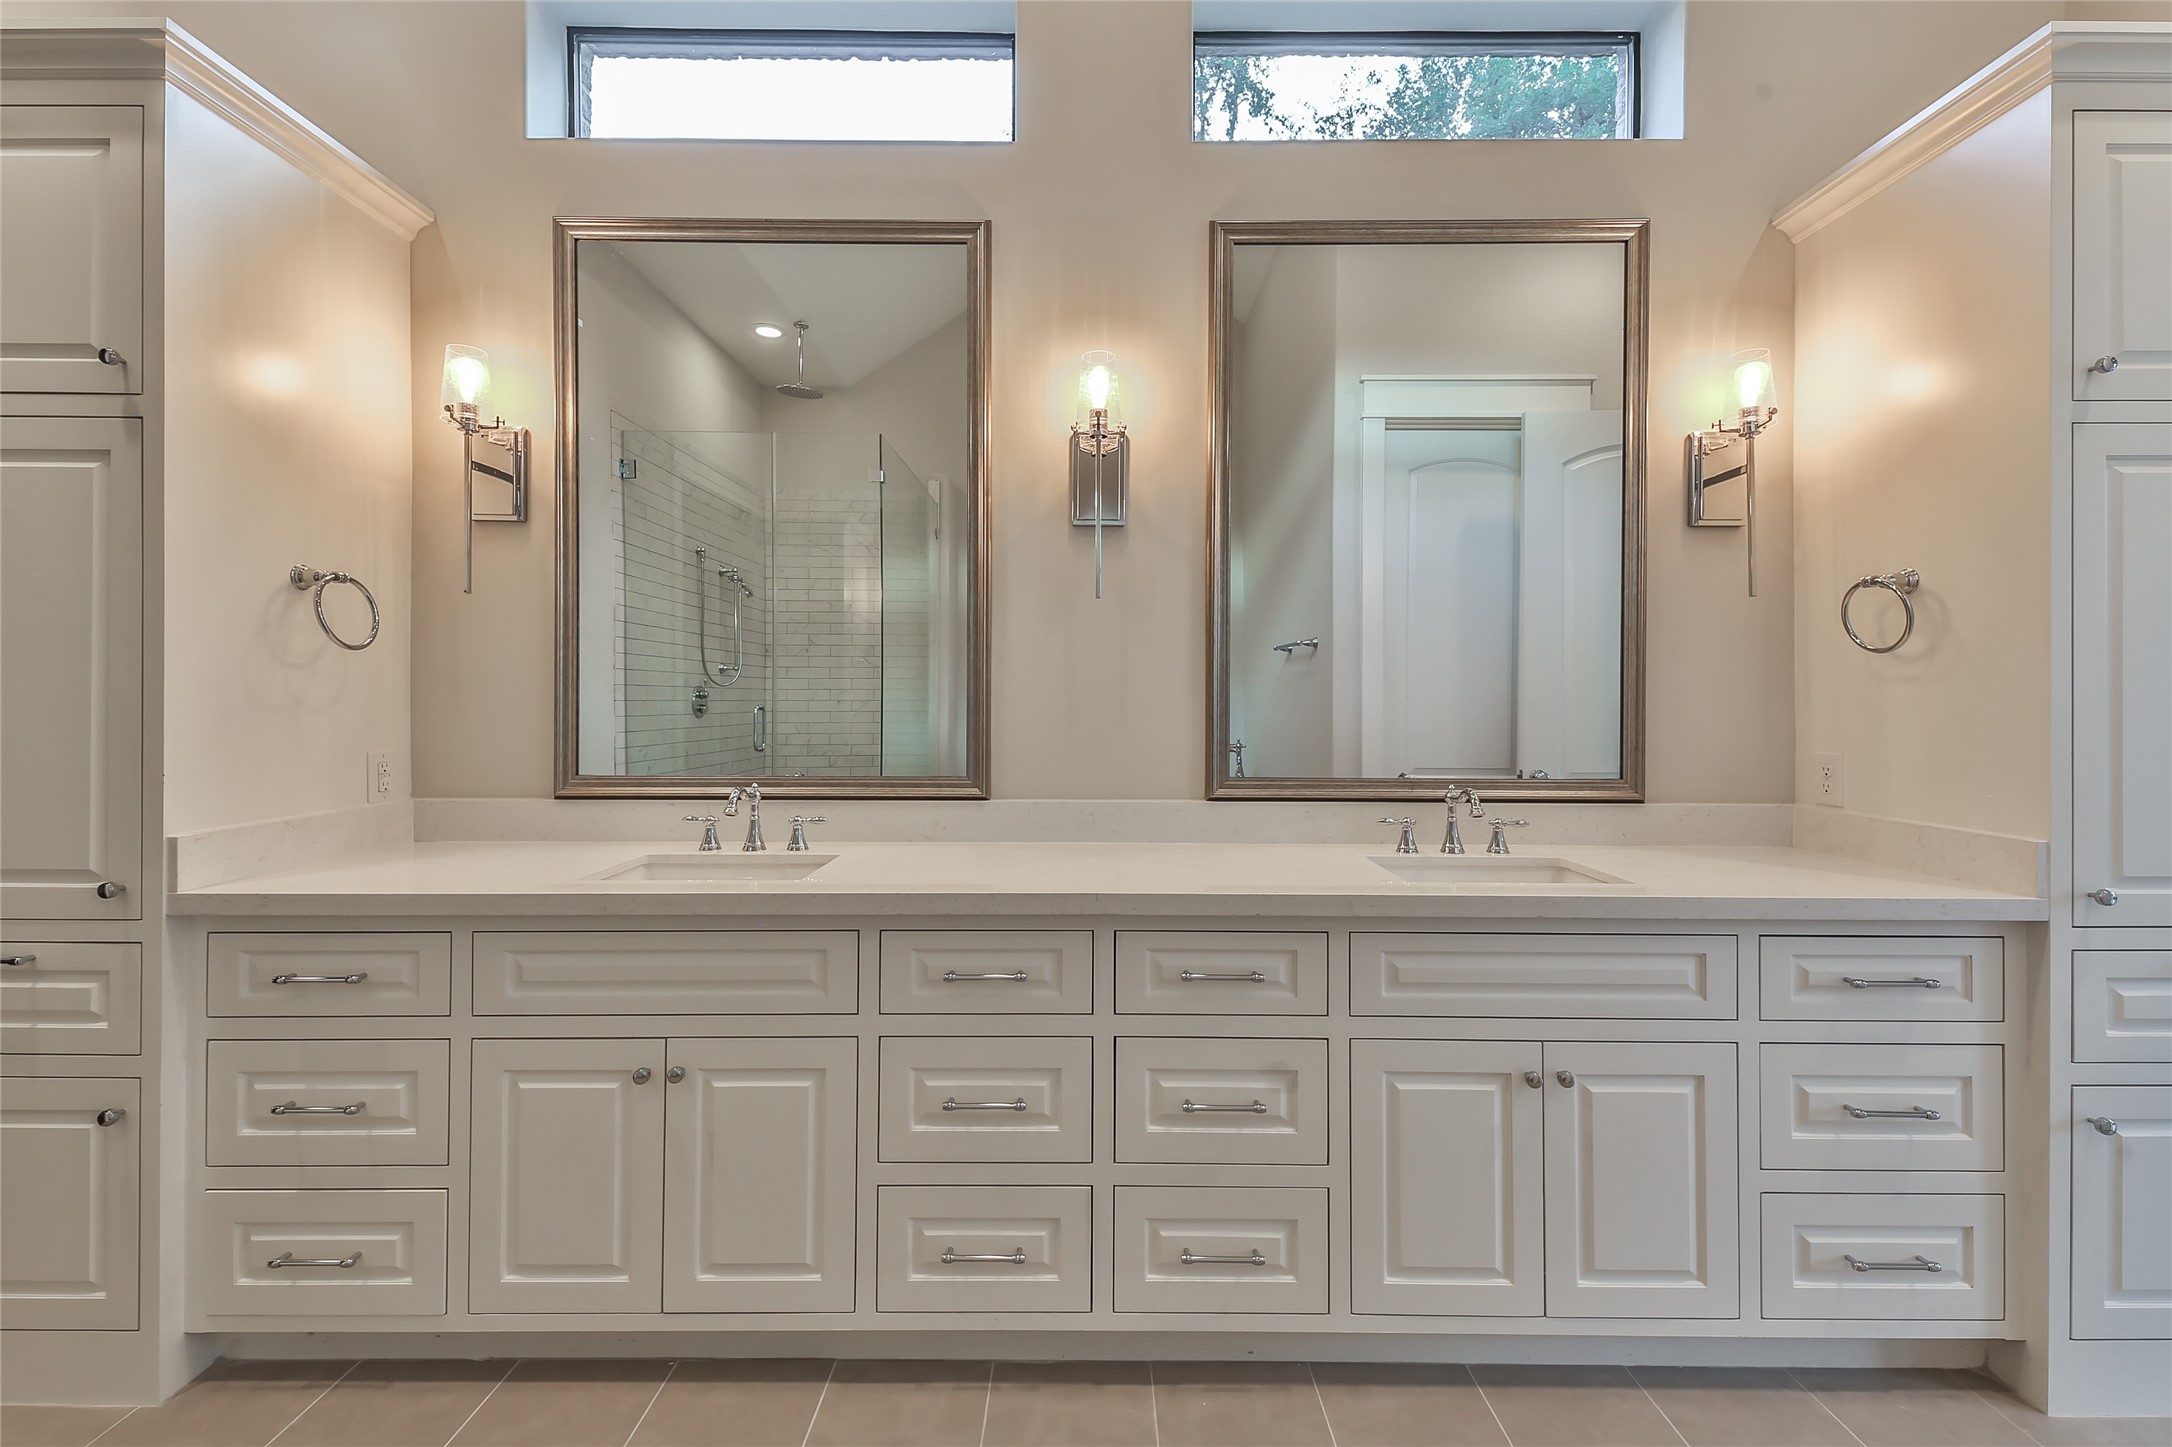 This is an example of a bath counter with double sinks in one of Tony's homes.